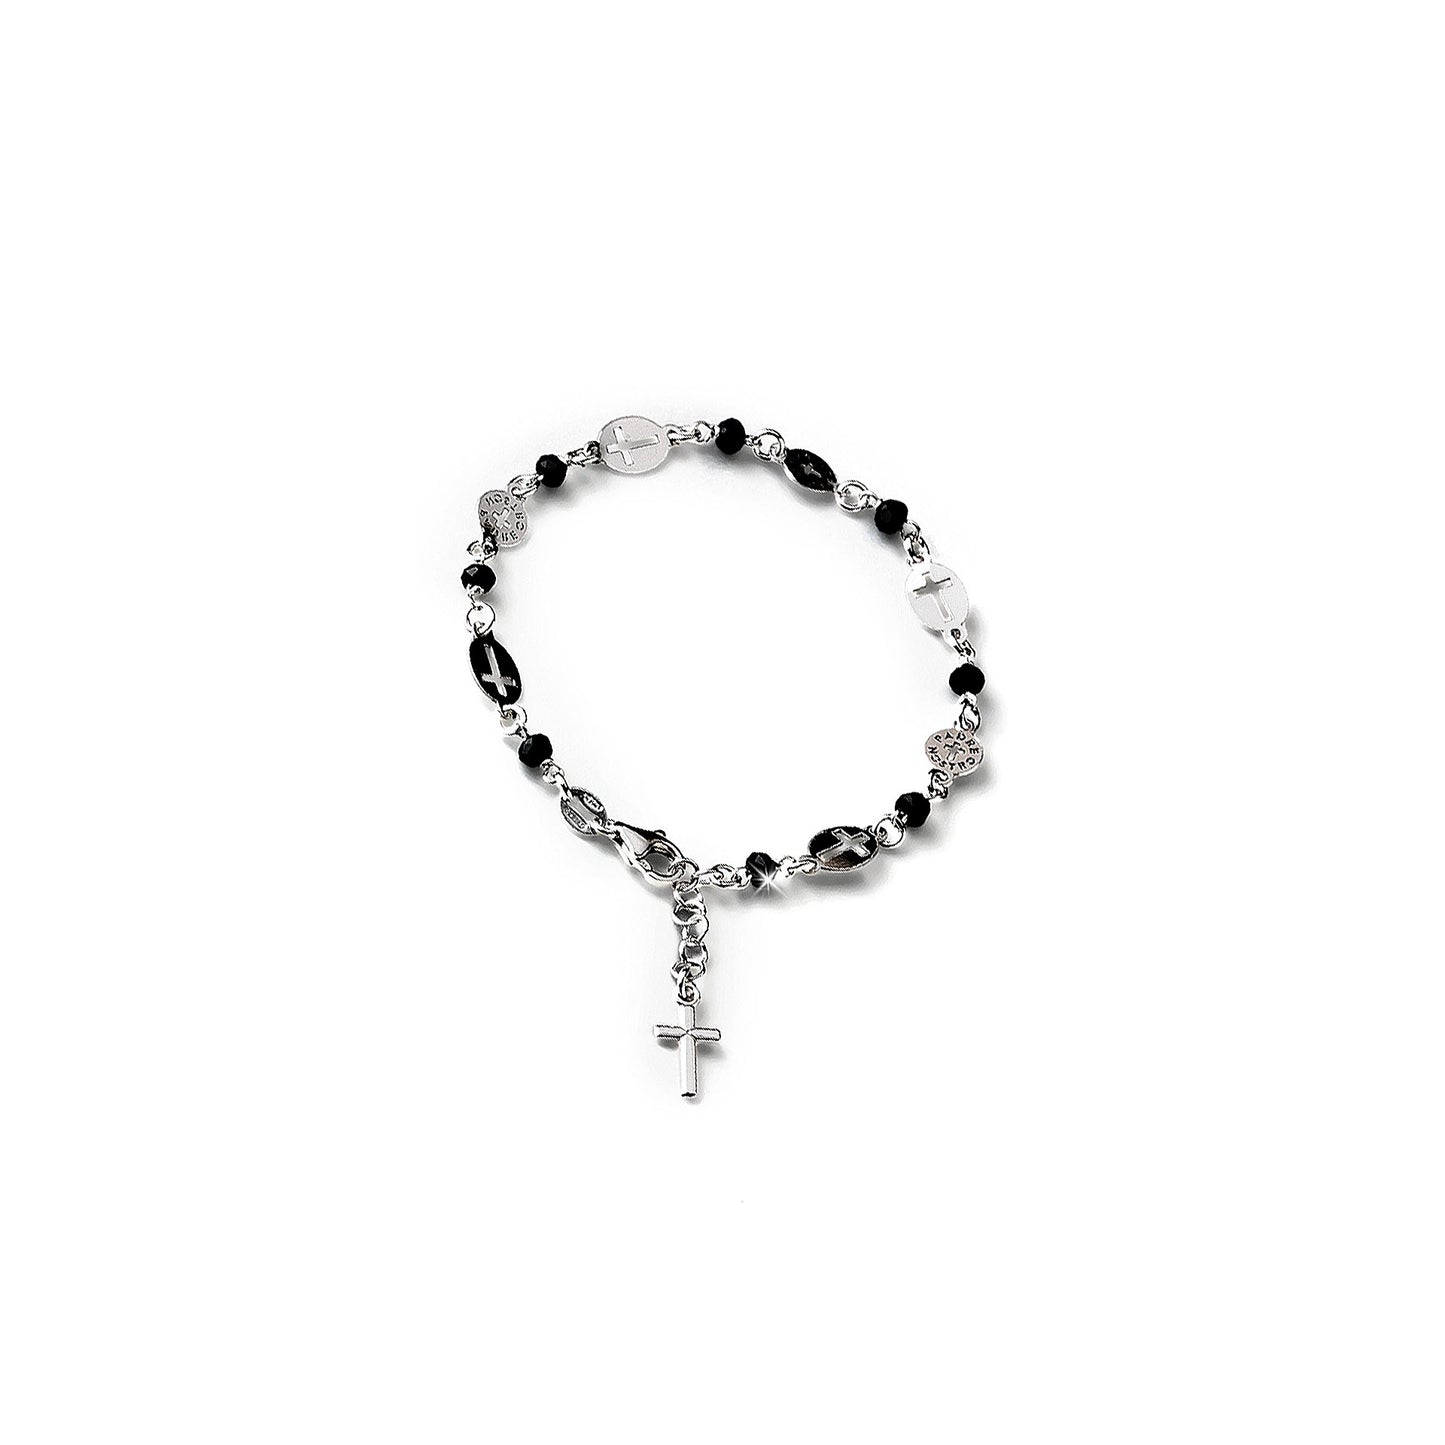 Bracelet in Rhodium/Silver 925 with crystal